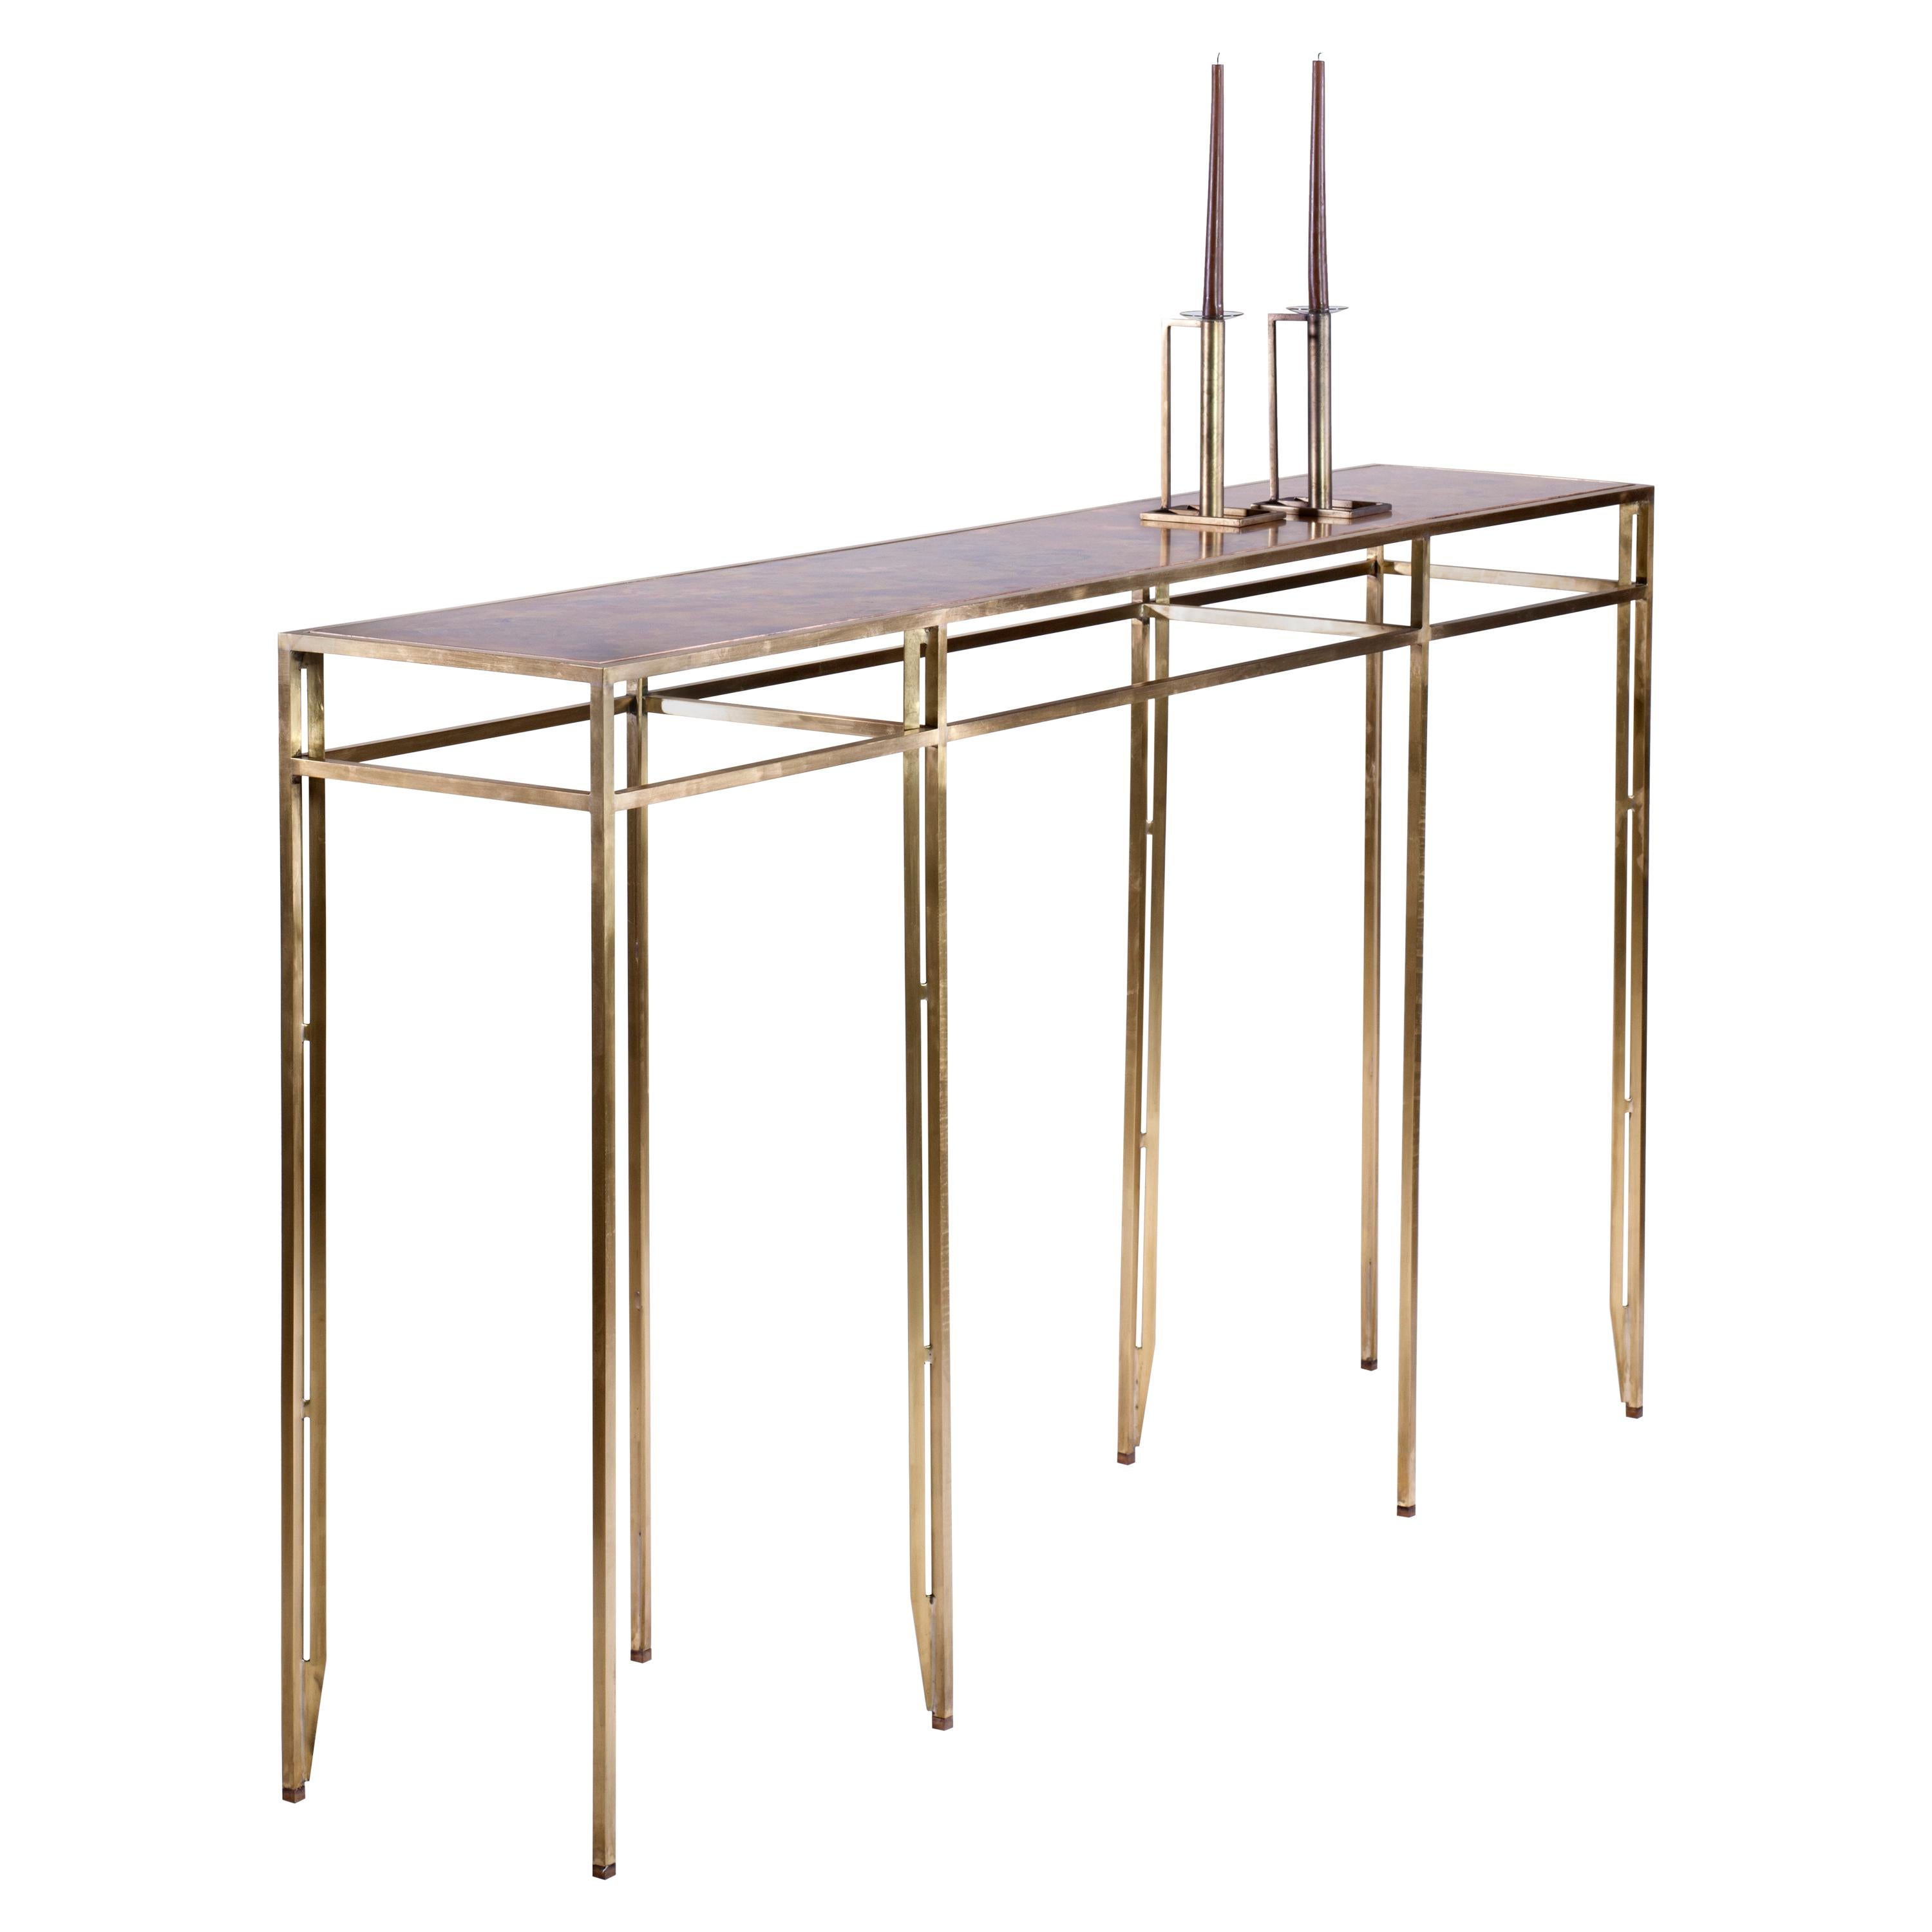 The Daddy Longlegs Console, 8-Legged Brass Frame, Patinated Bronze Top